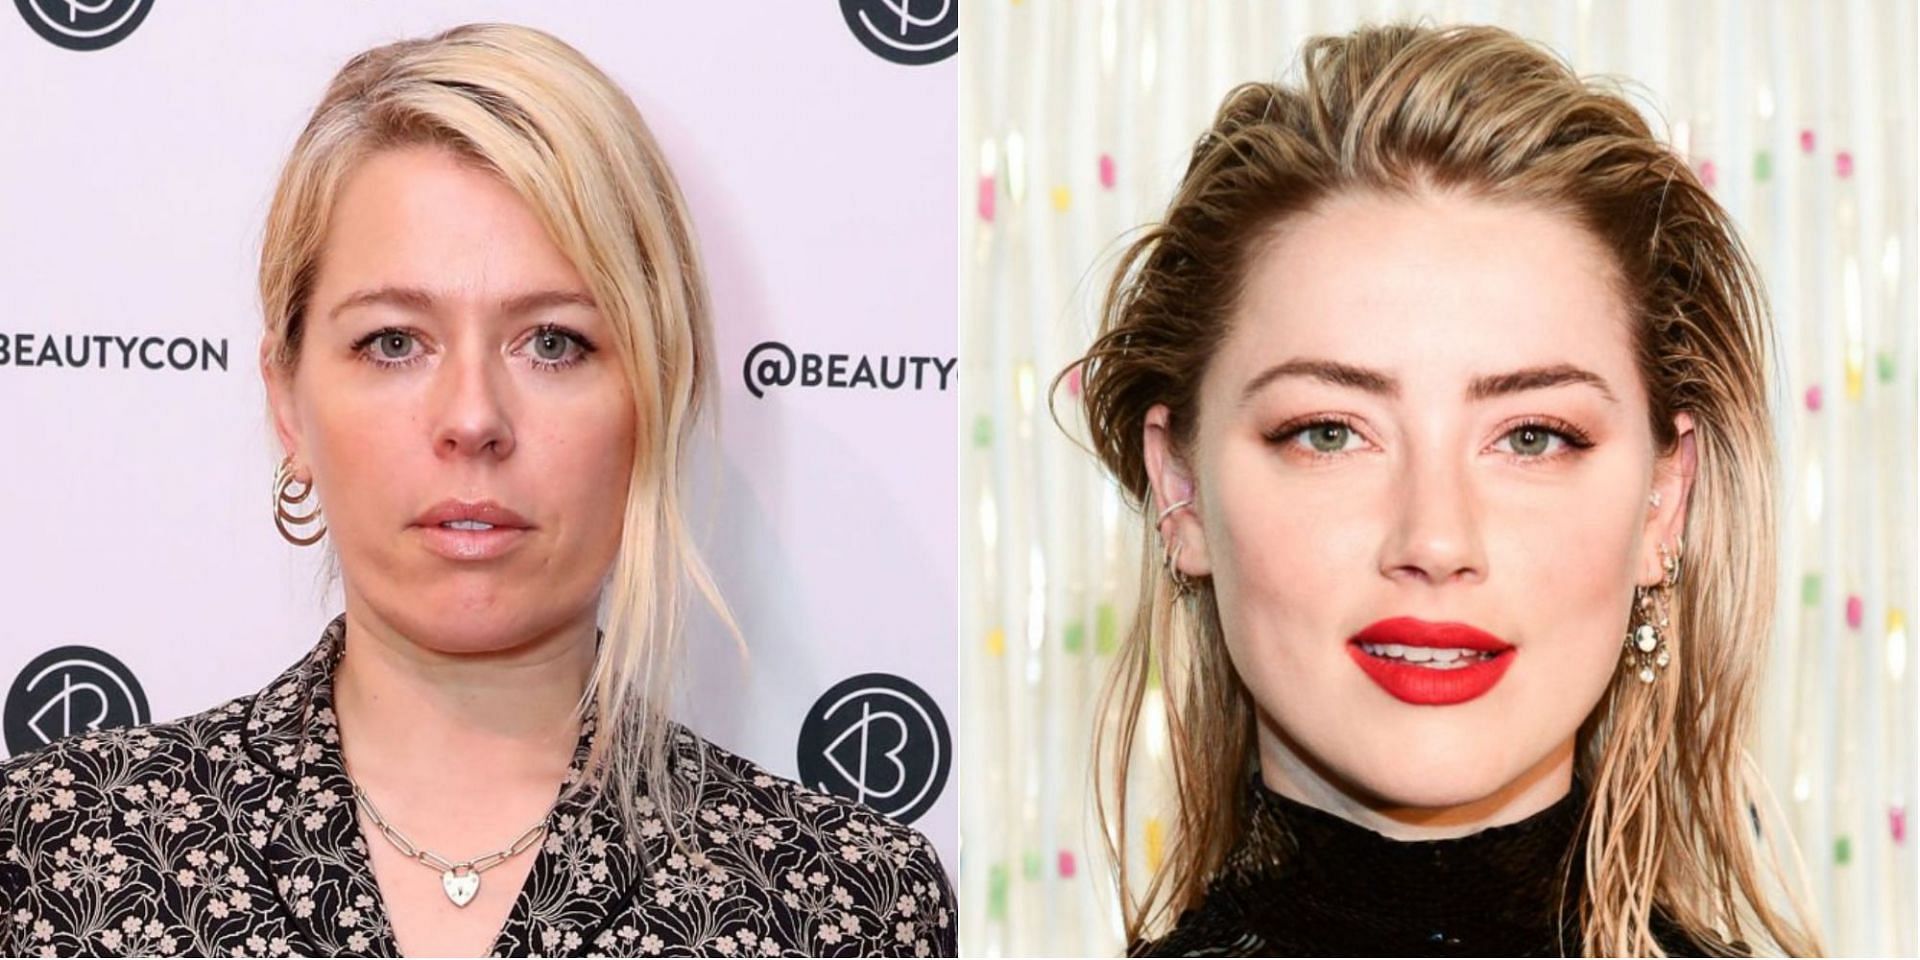 Amber Heard&#039;s longtime friend Amanda de Cadenet withdrew her support of the actress during Johnny Depp&#039;s 2020 defamation trial against The Sun (Image via Getty Images)